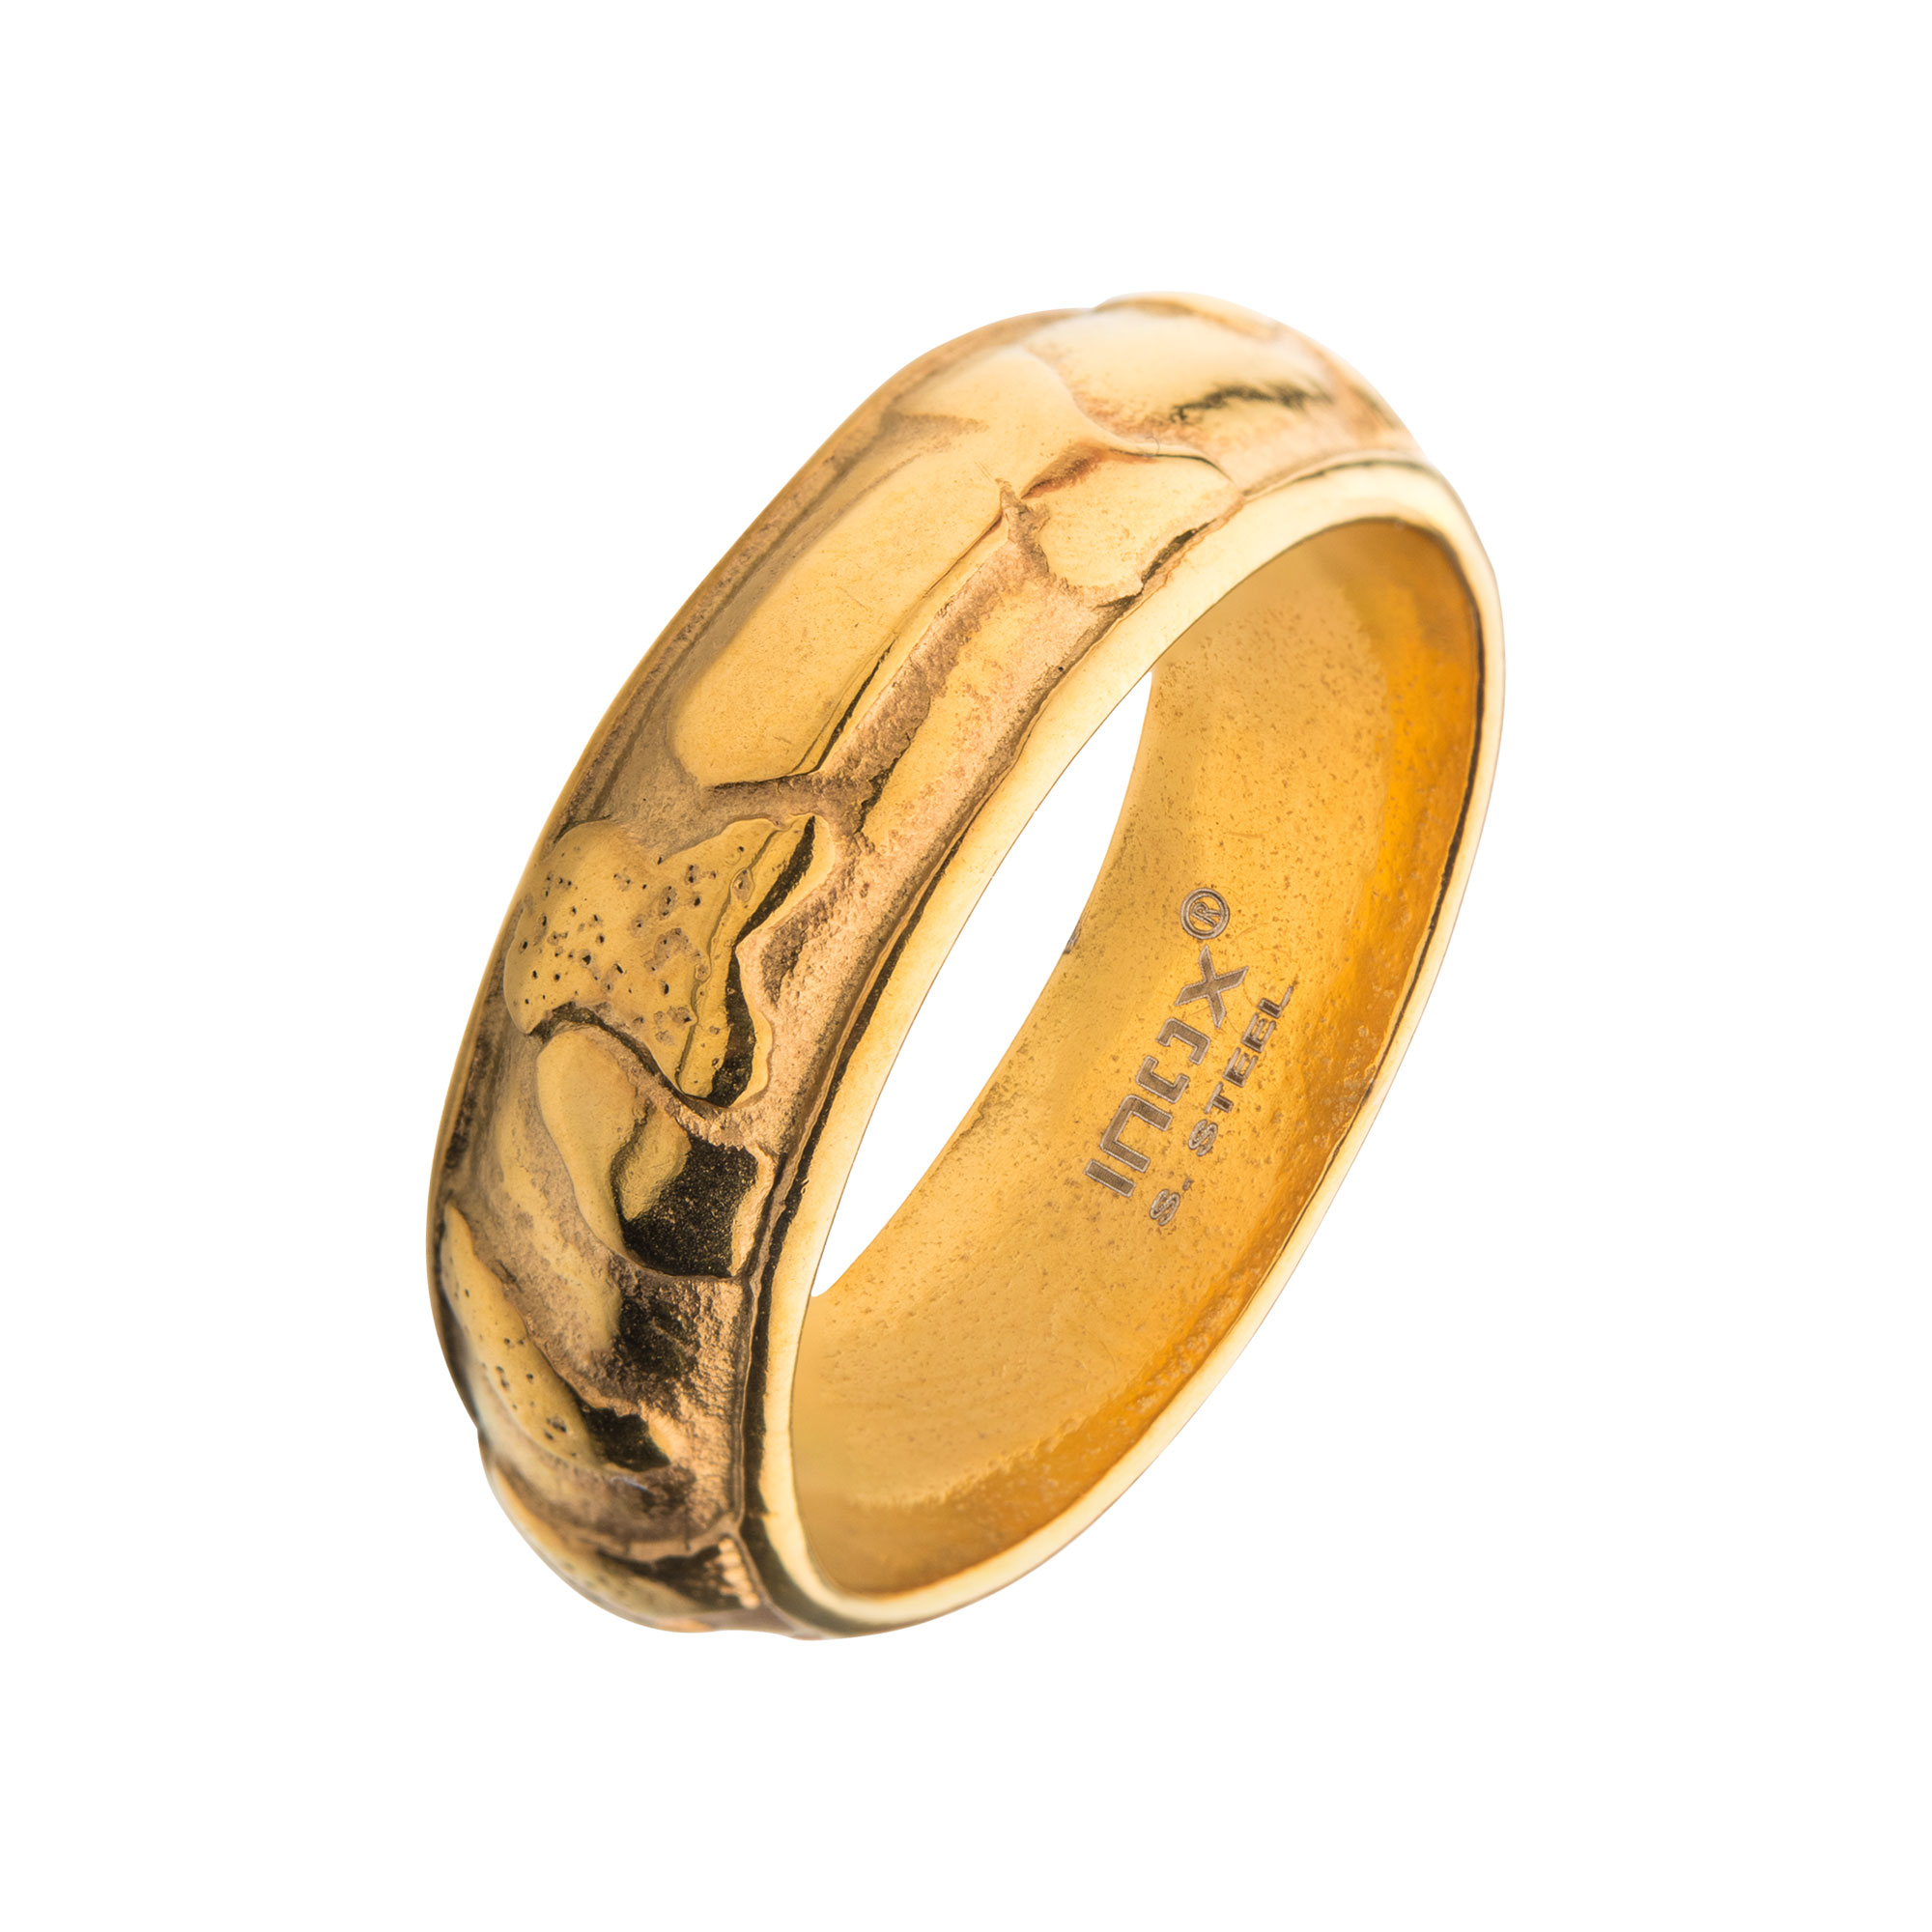 7.5mm Gold Plated 3D Canyon Pattern Ring Ken Walker Jewelers Gig Harbor, WA